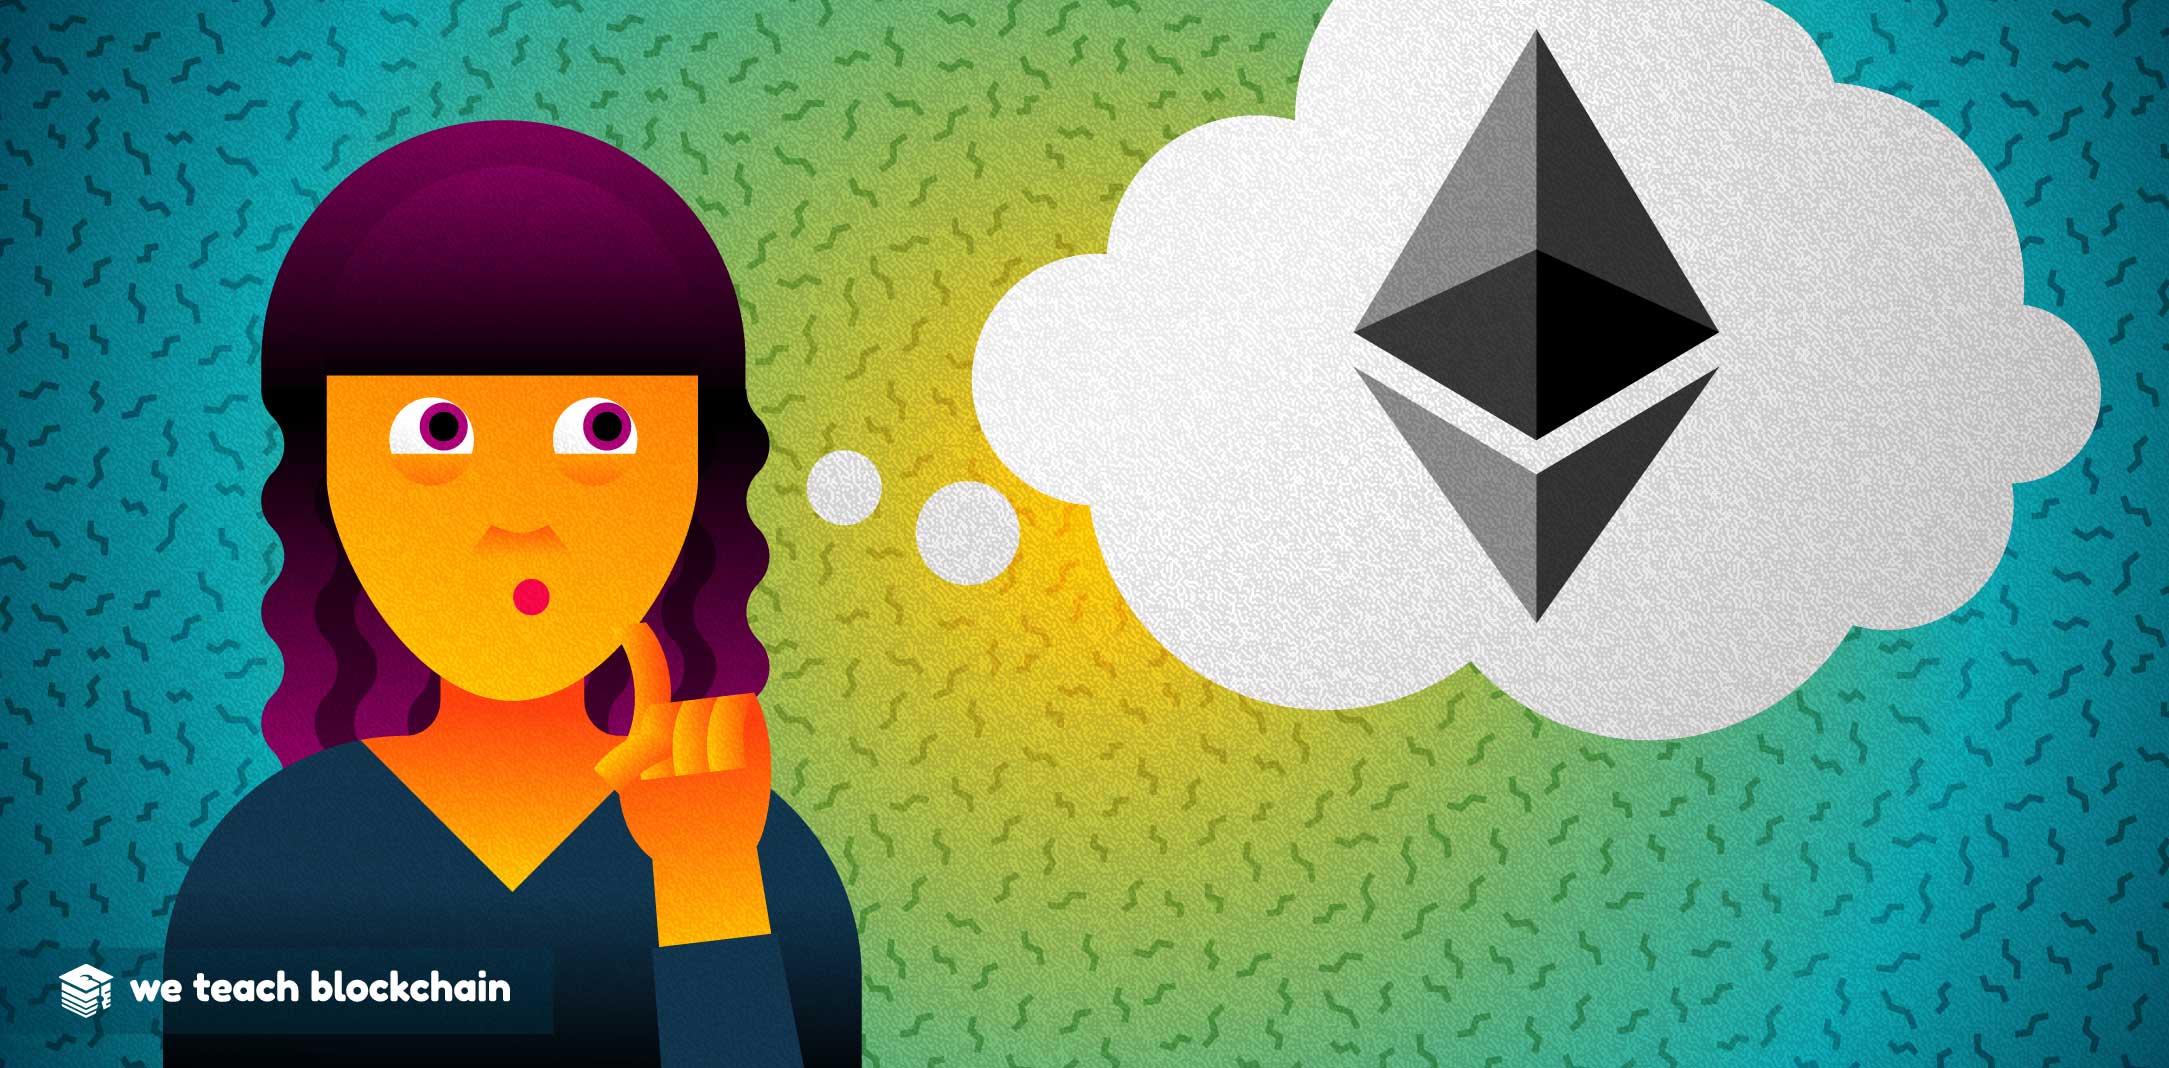 Thinking about Ethereum